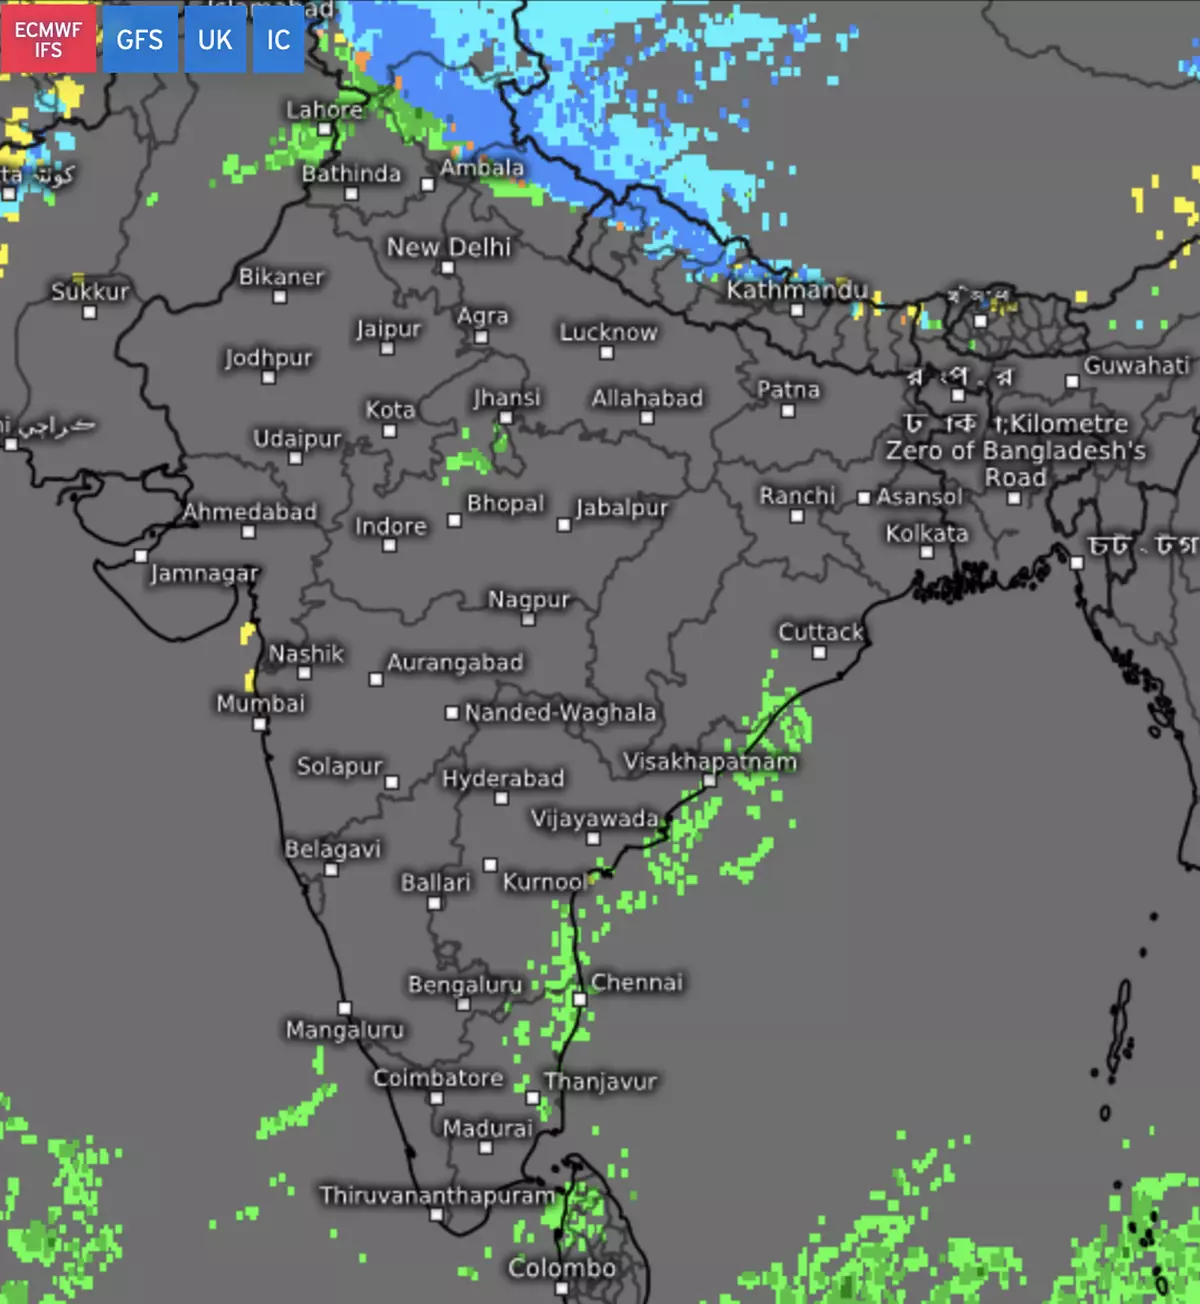 Thundershowers (green) and snow (in blues) wallop parts of hills and plains of North-West India even as the Bay of Bengal gets into activity towards the South as depicted by satellite pictures on Friday morning.